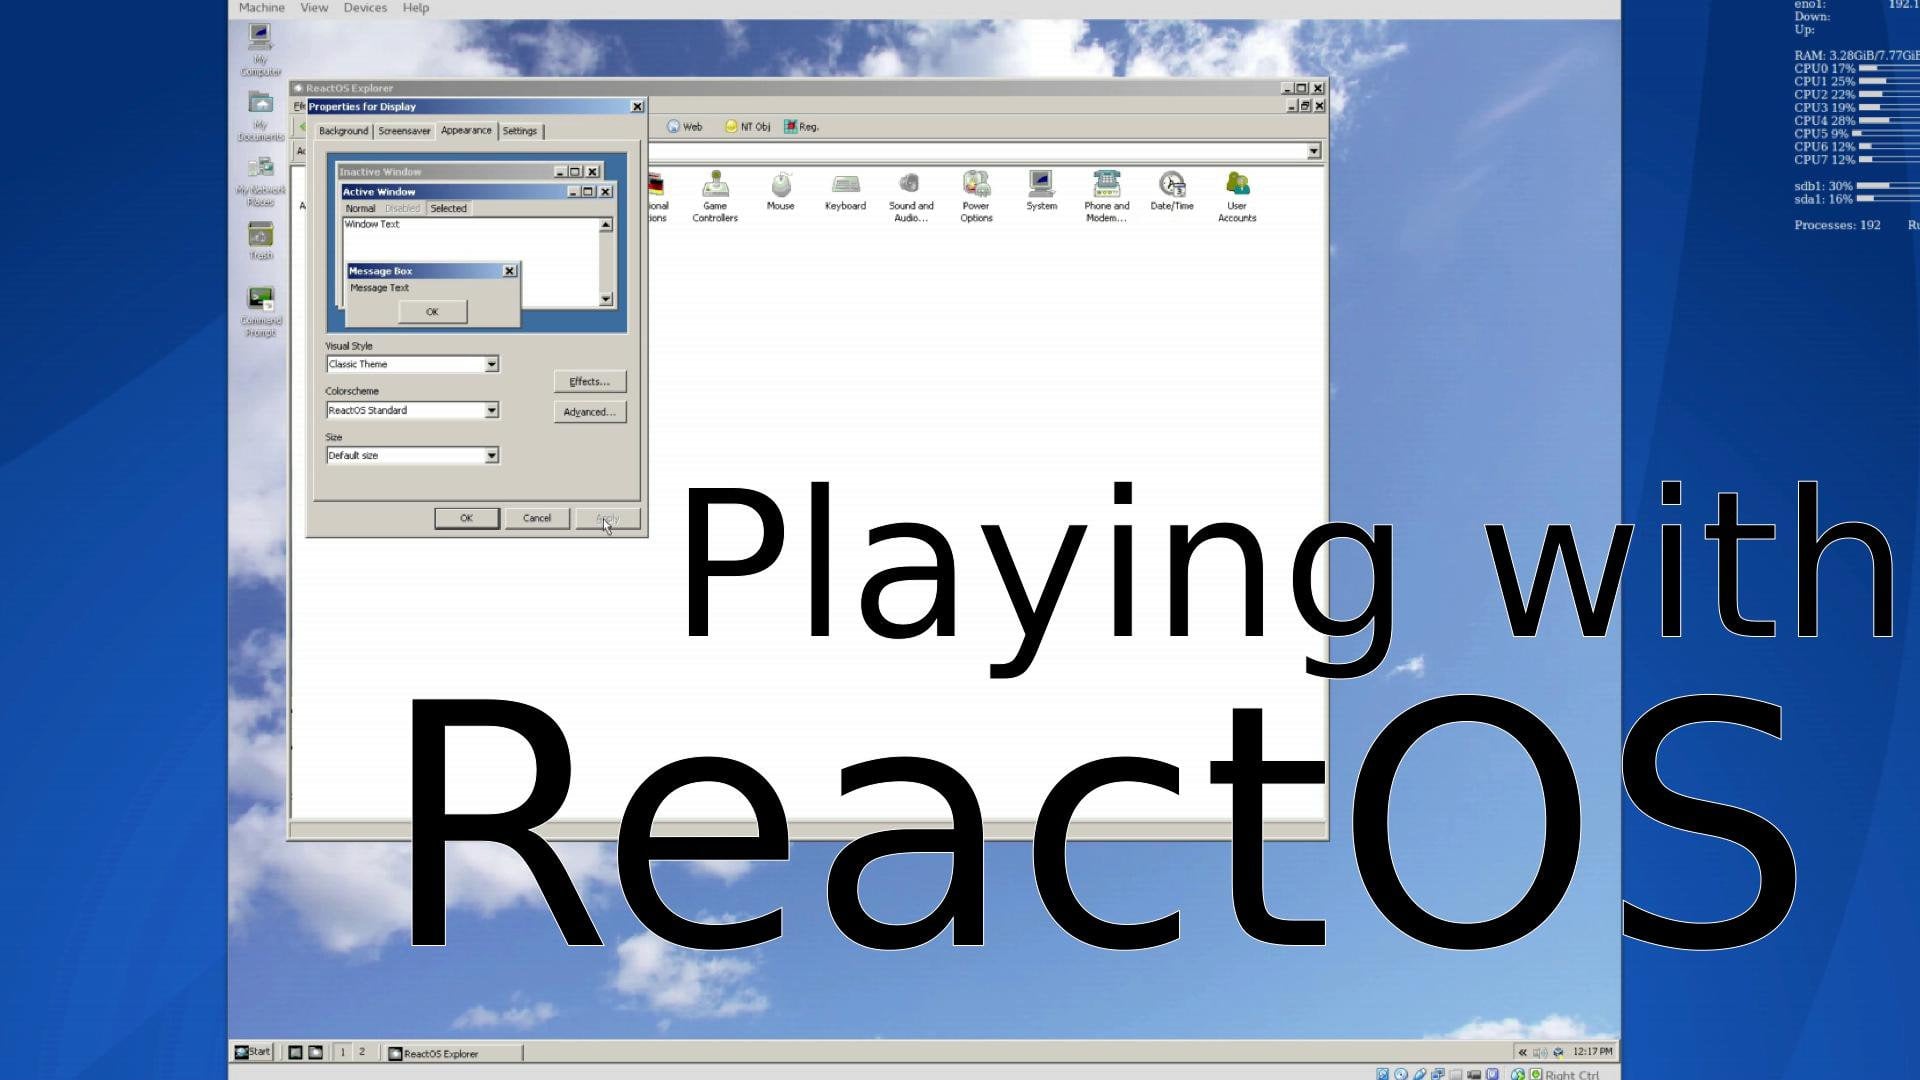 Playing with ReactOS